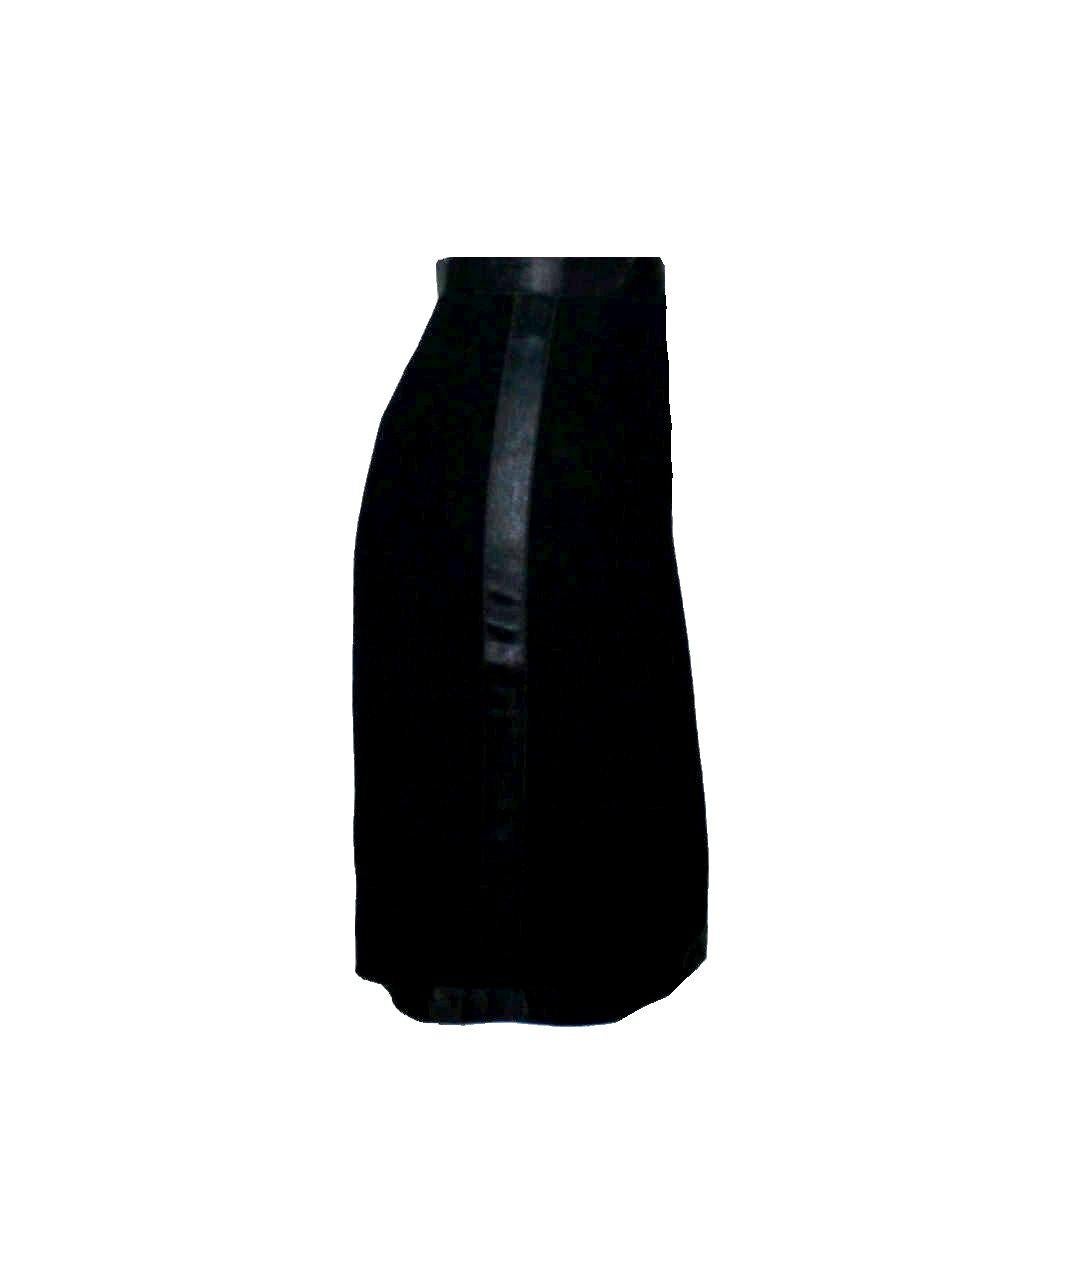 Beautiful CHANEL skirt designed by Karl Lagerfeld
A true CHANEL signature item in the so famous black that will last you for many years
Black fabric with satin strip trimming on hems and on sides - just like the skirt variation of a tuxedo
Fully